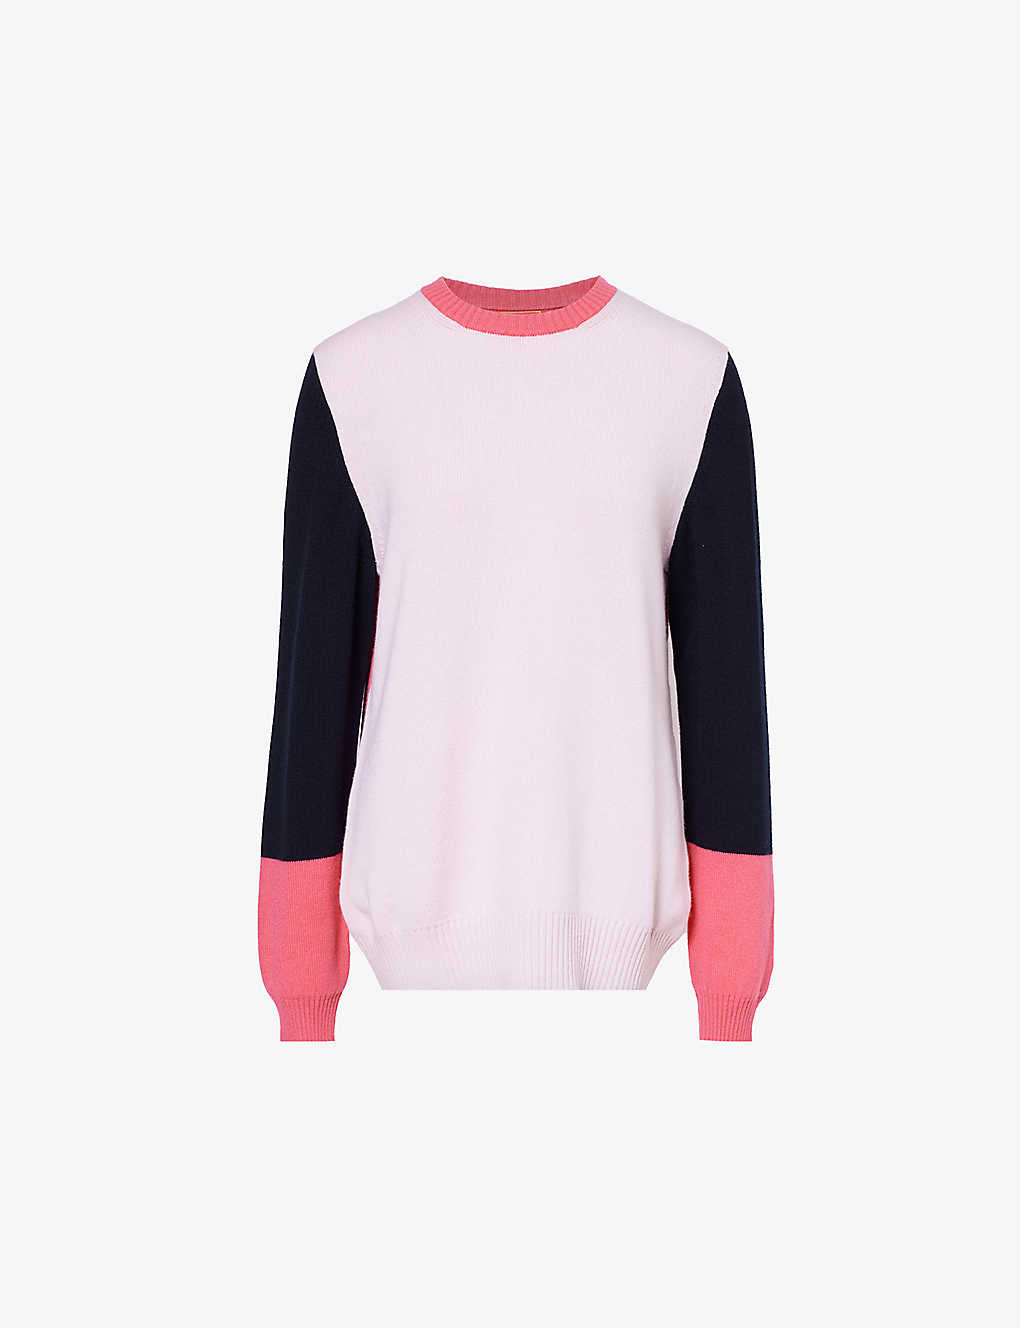 Barrie X Sofia Coppola Color-blocked Cashmere Sweater In Berry